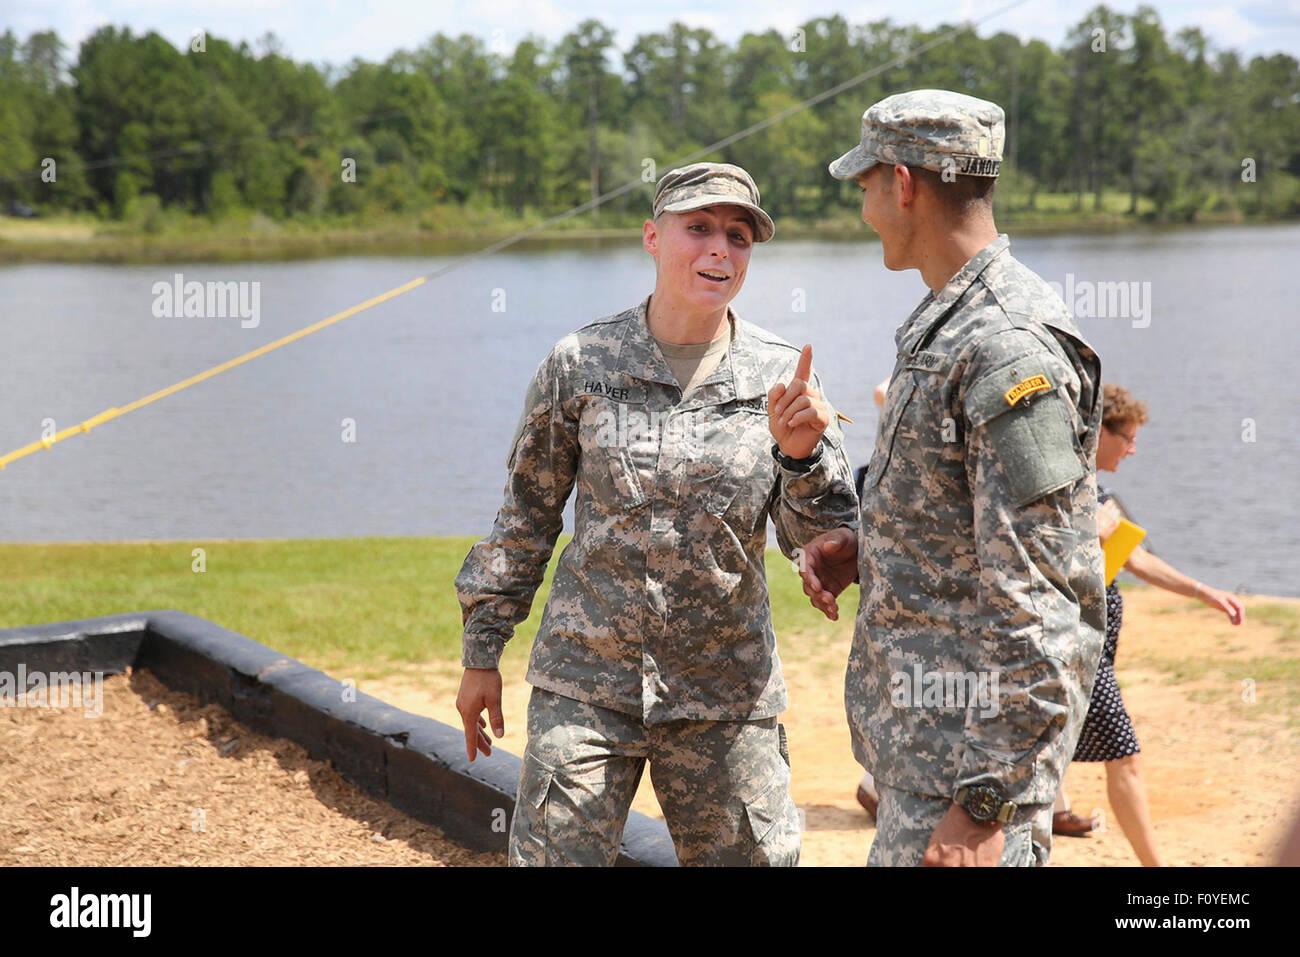 U.S. Army 1st Lt. Shaye Haver jokes with a fellow soldier after graduation ceremonies at the Army Ranger school August 21, 2015 at Fort Benning, Georgia. Haver and fellow soldier Captain Kristen Griest became the first women to graduate from the 61-day-long Ranger course considered one of the most intense and demanding in the military. Stock Photo